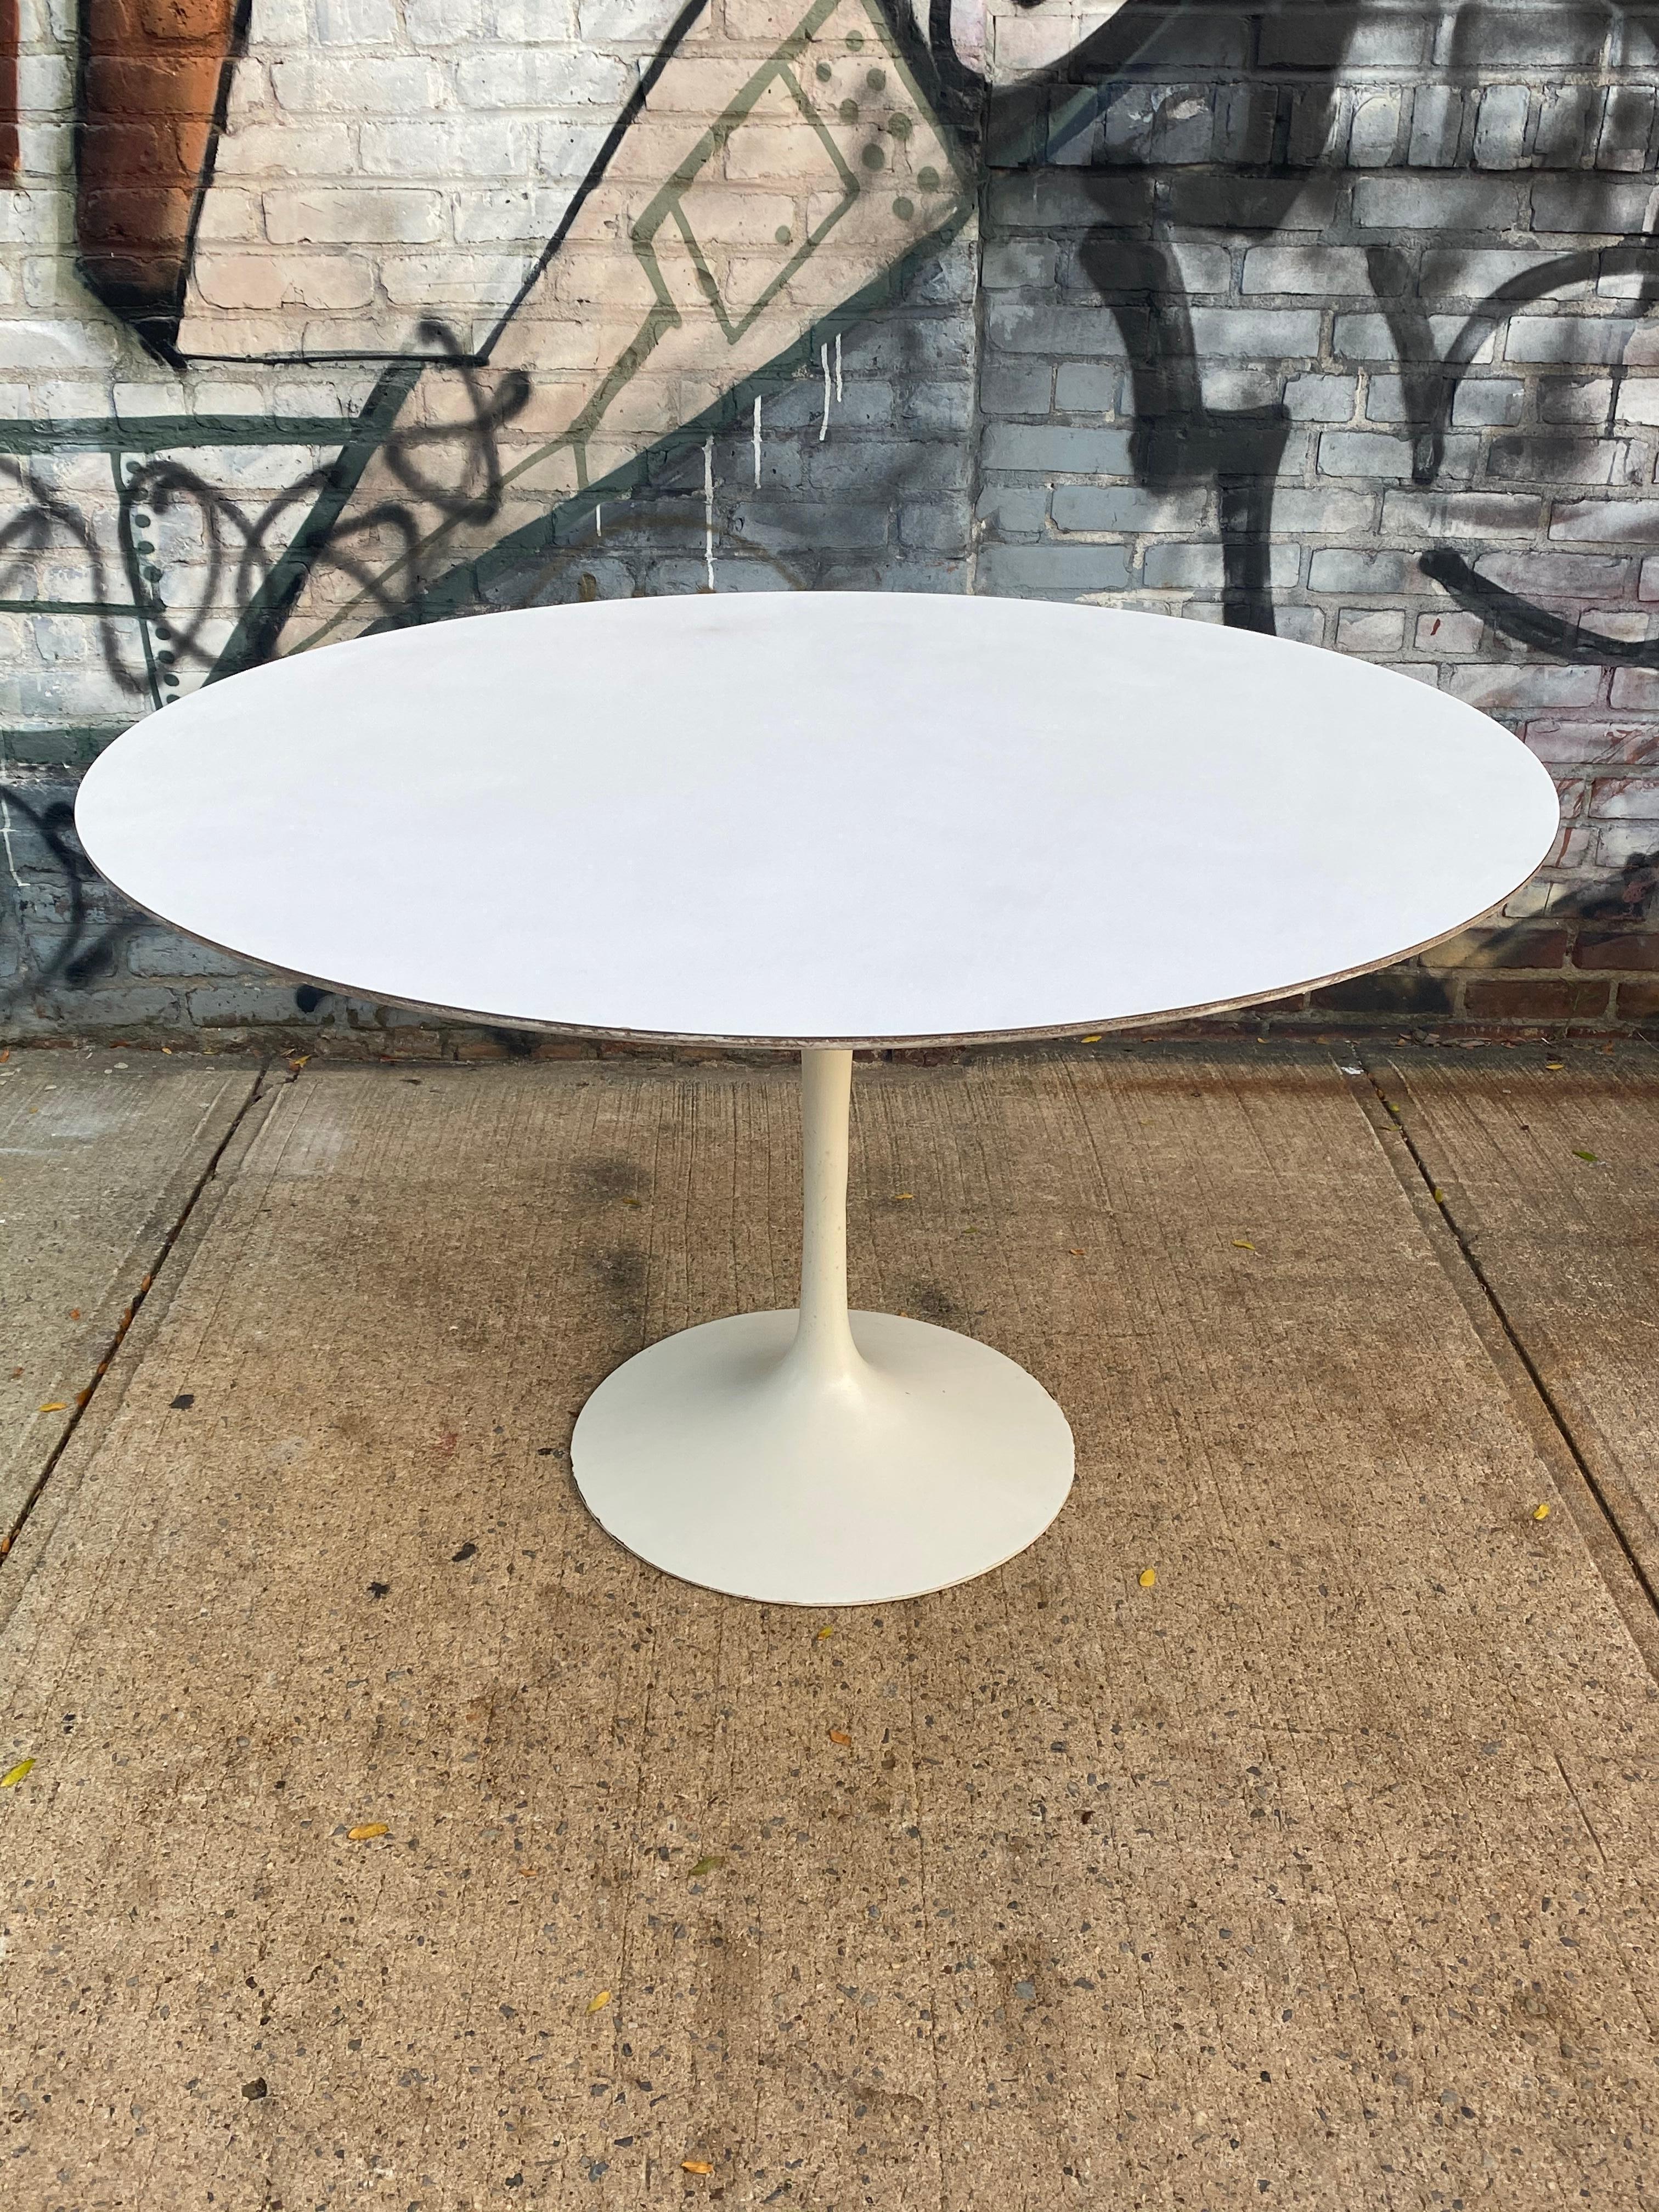 Eero Saarinen for Knoll 47 inch round tulip dining table. Signed with original Knoll tag and guaranteed authentic.